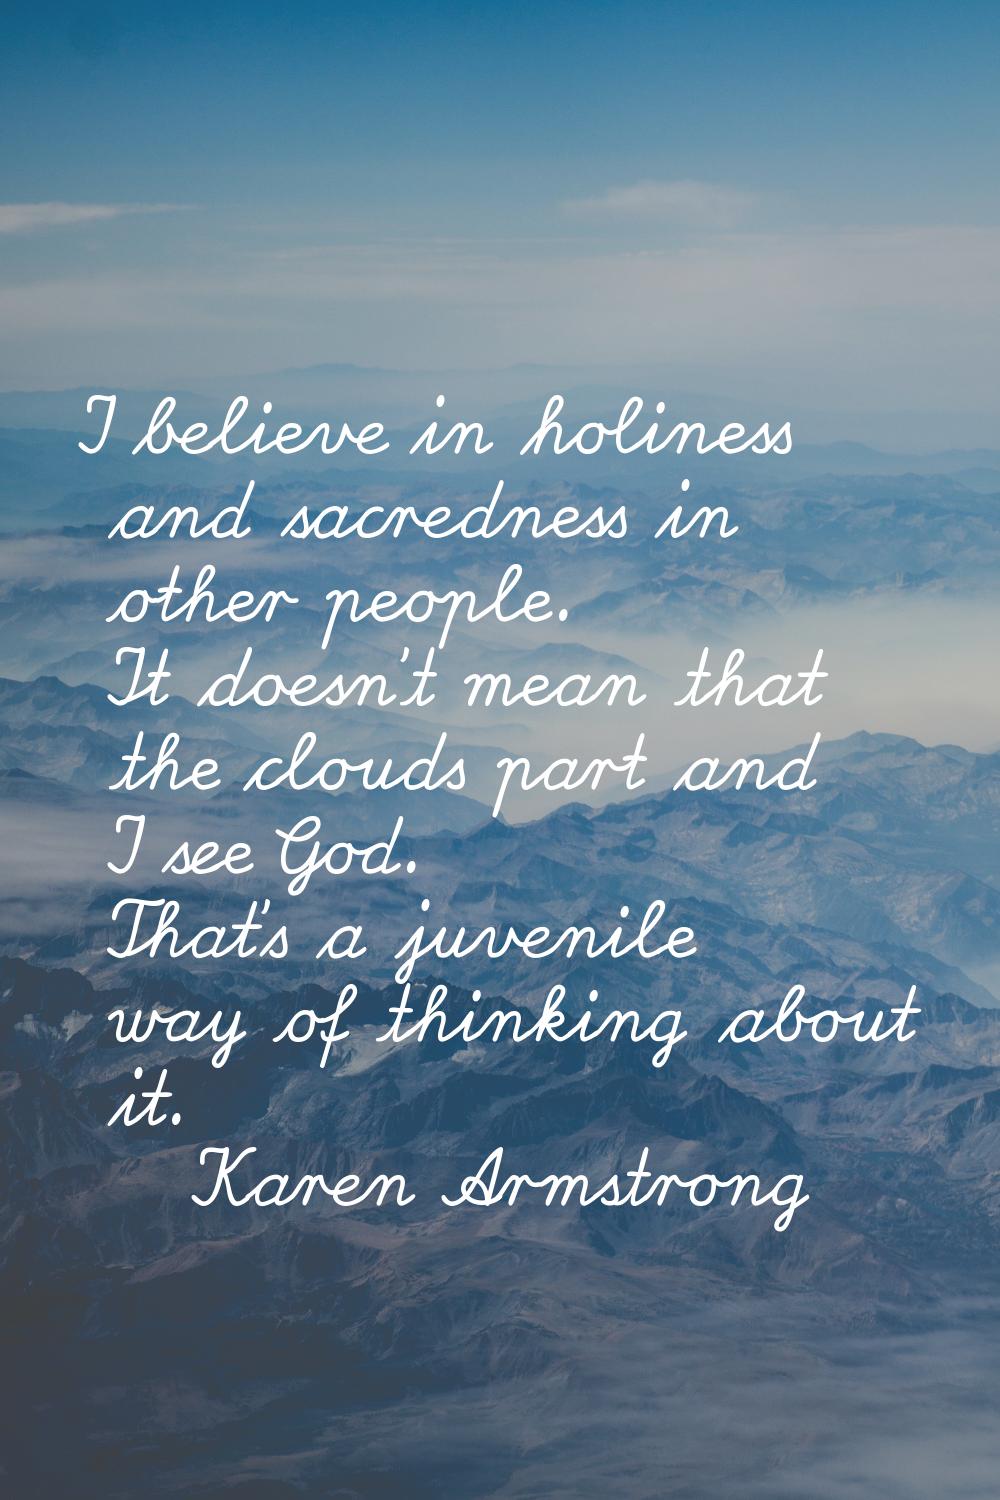 I believe in holiness and sacredness in other people. It doesn't mean that the clouds part and I se